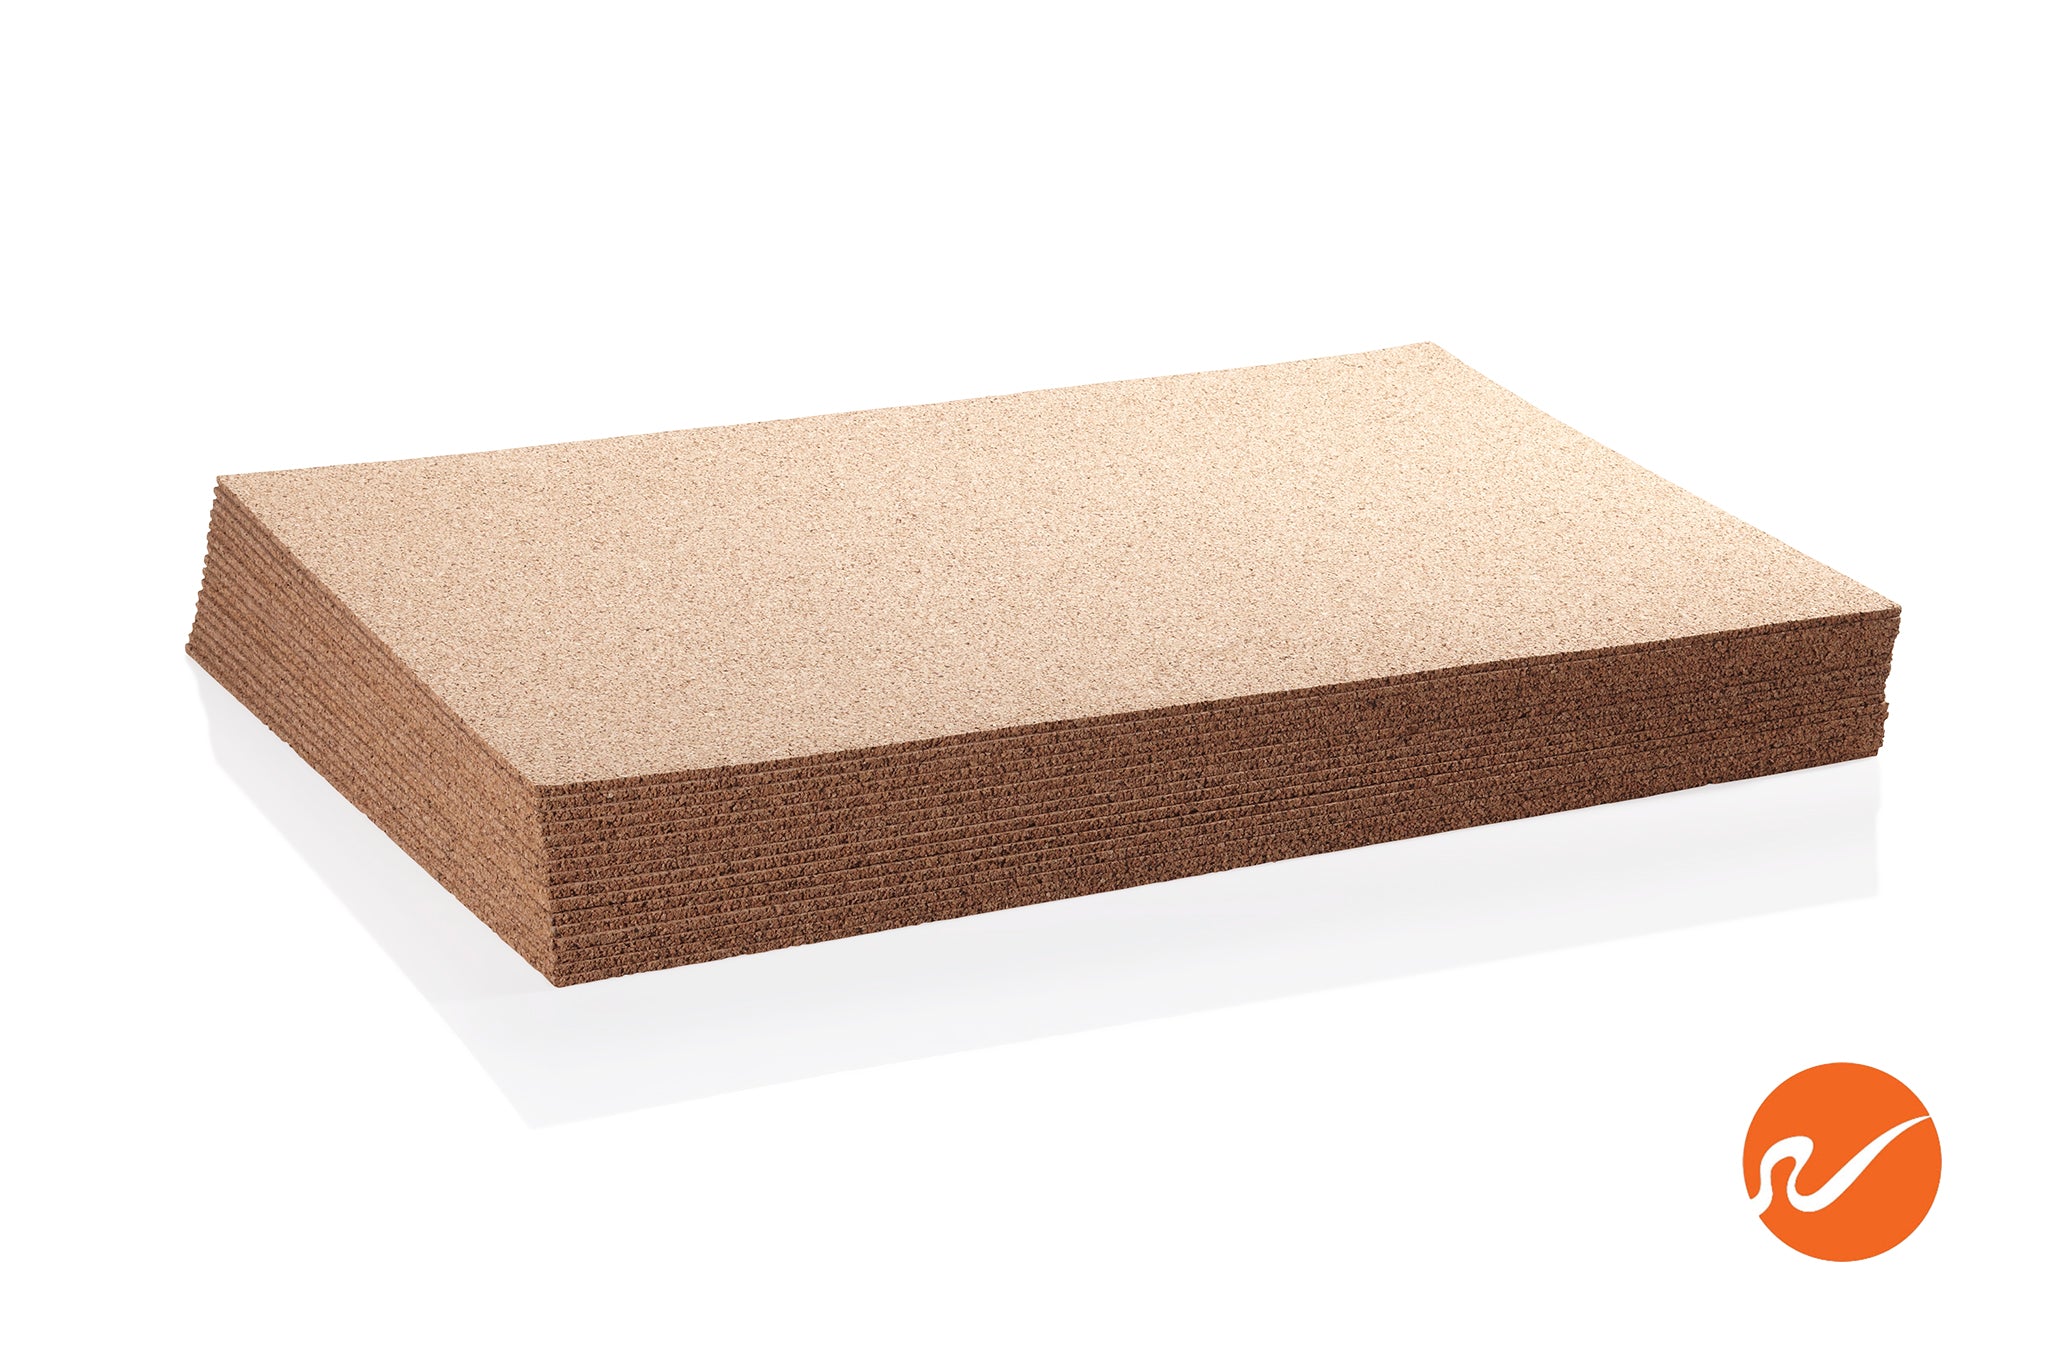 2ft x 3ft 6mm (1/4 IN. thick) Cork Sheets (300sf box)